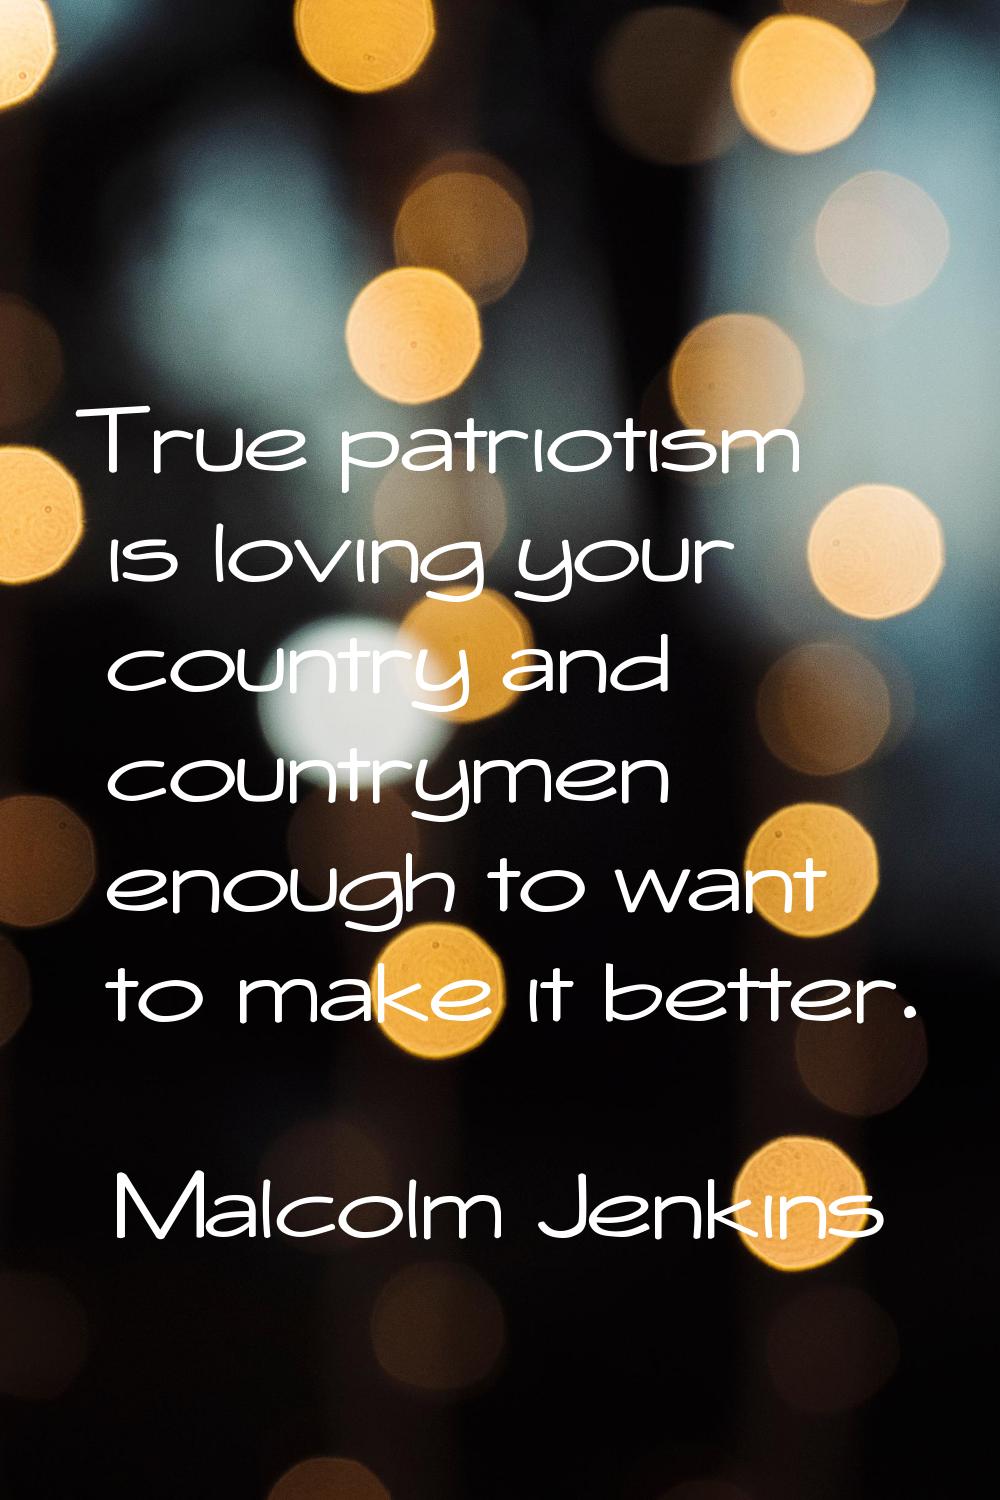 True patriotism is loving your country and countrymen enough to want to make it better.